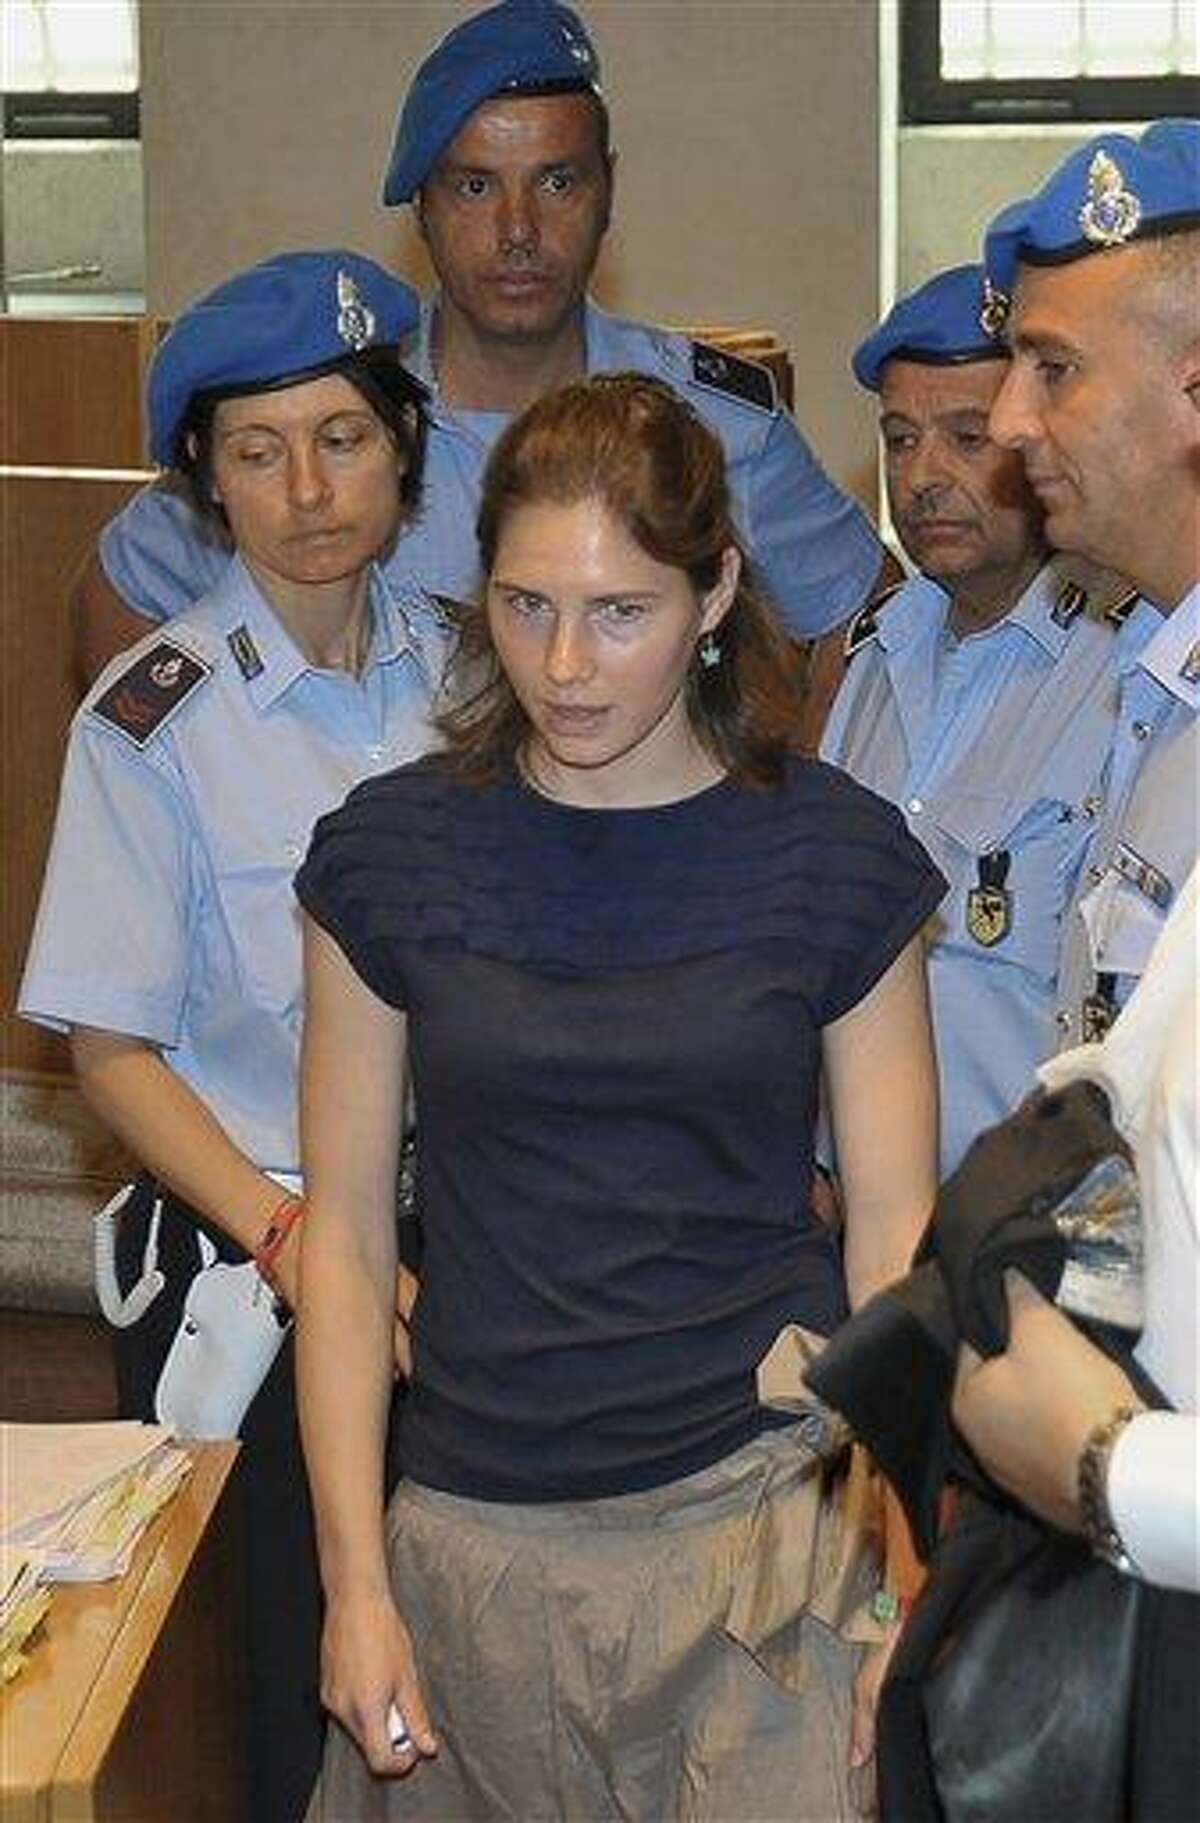 Amanda Knox, centre, escorted by Penitentiary guards, arrives for the appeal hearing, in Perugia, Italy, Monday, June 27, 2011. The appeals trial of American student Amanda Knox against her murder conviction resumed Monday in a packed courtroom where an Ivorian man convicted in the slaying is to take the stand in closely watched testimony. Rudy Hermann Guede is serving a 16-year-prison sentence for the 2007 murder of Meredith Kercher, a British student who was stabbed to death in the apartment she shared with Knox. (AP Photo/Stefano Medici)